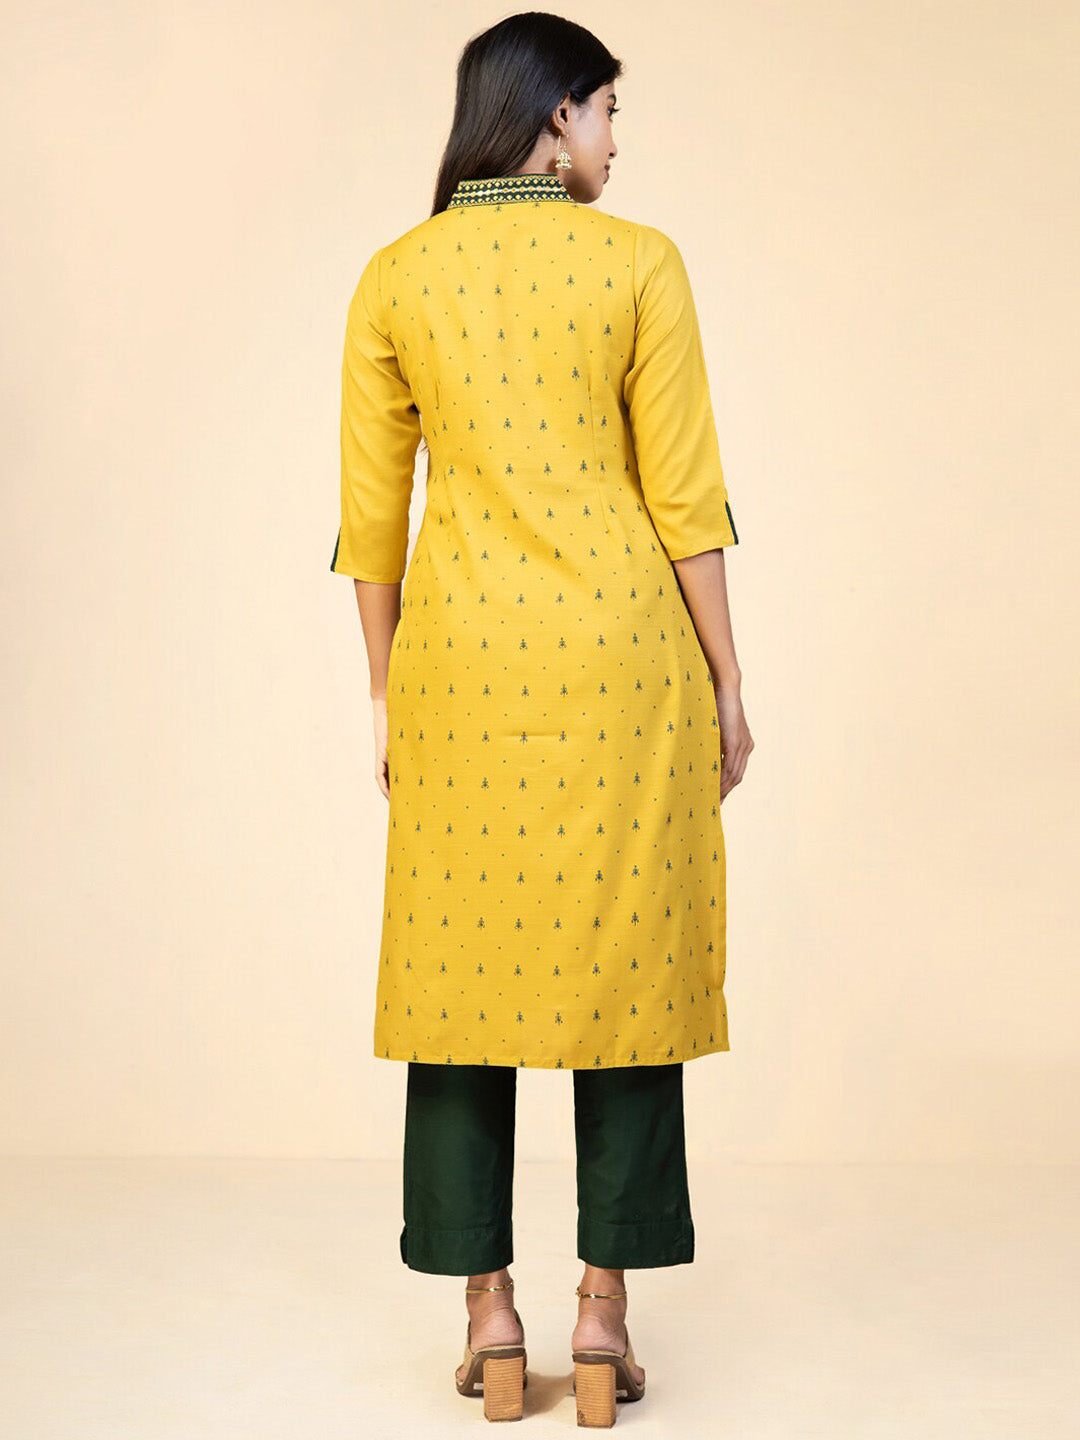 Geometric Motif Embroidered With All Over Butta Printed Kurta - Yellow